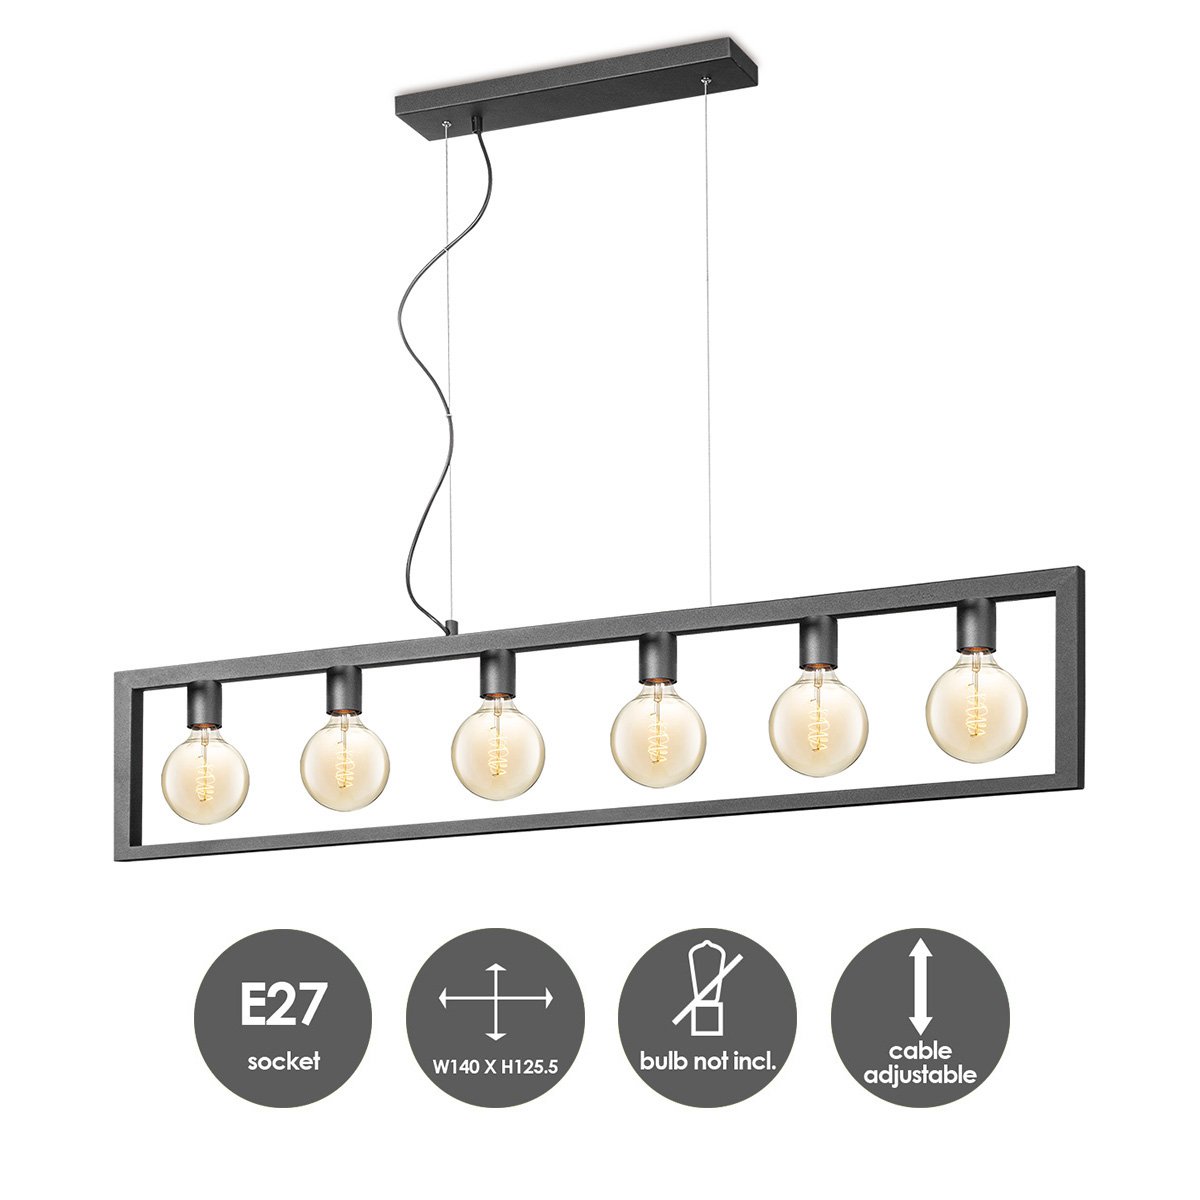 Home Sweet Home Hanging lamp Fito 6 lights - Black - 140x12x125cm